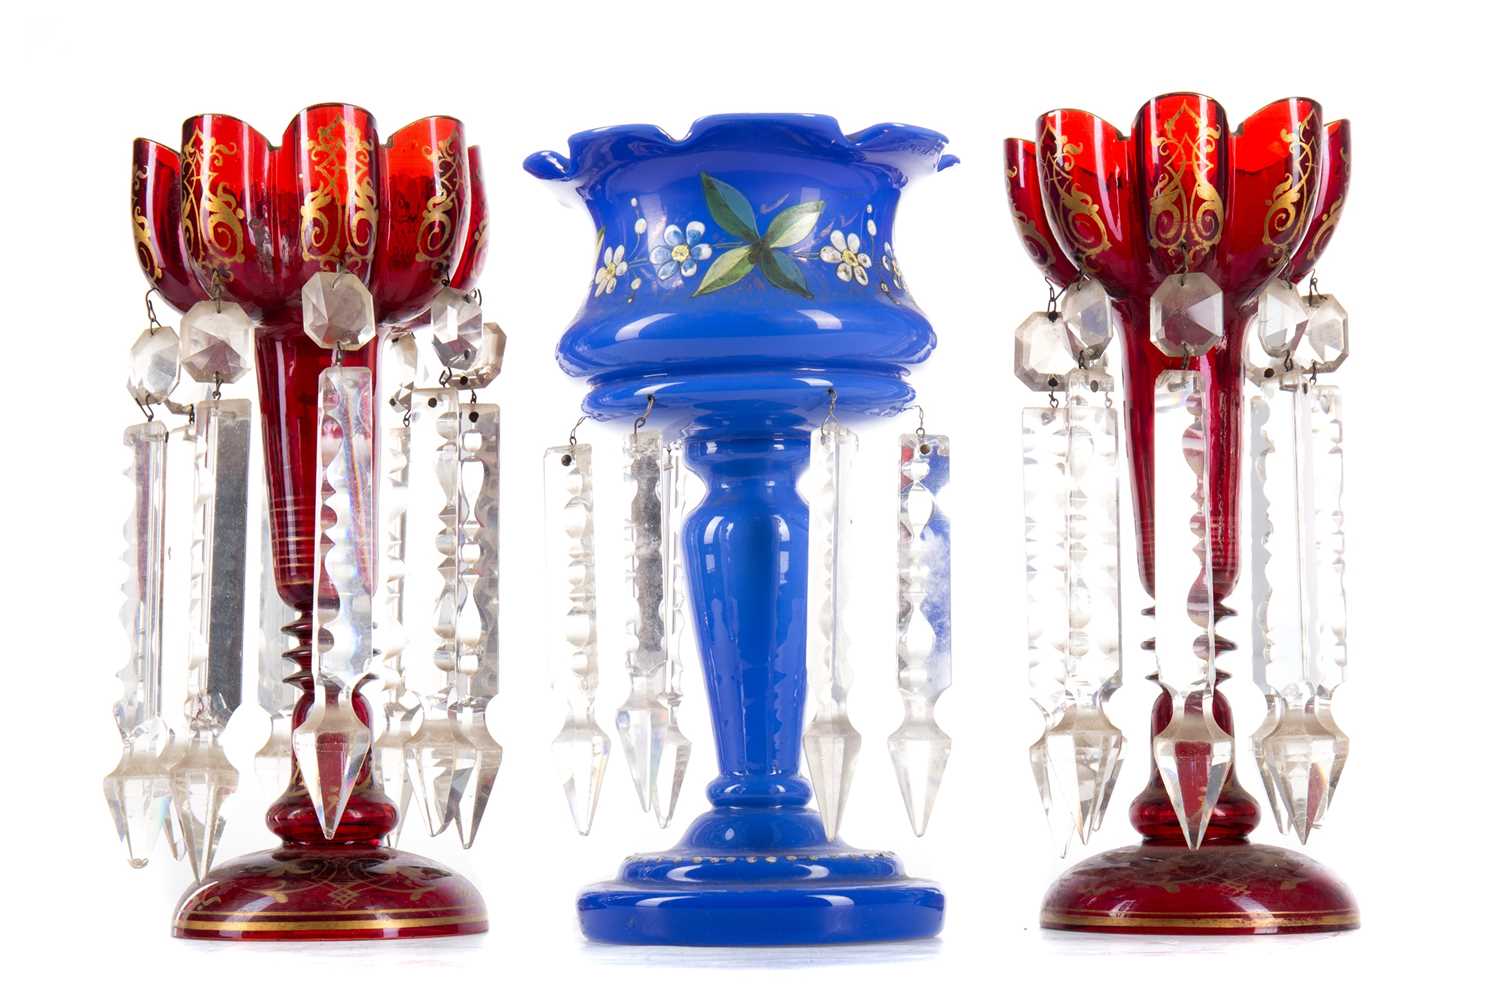 PAIR OF BOHEMIAN RUBY GLASS LUSTRES LATE 19TH CENTURY